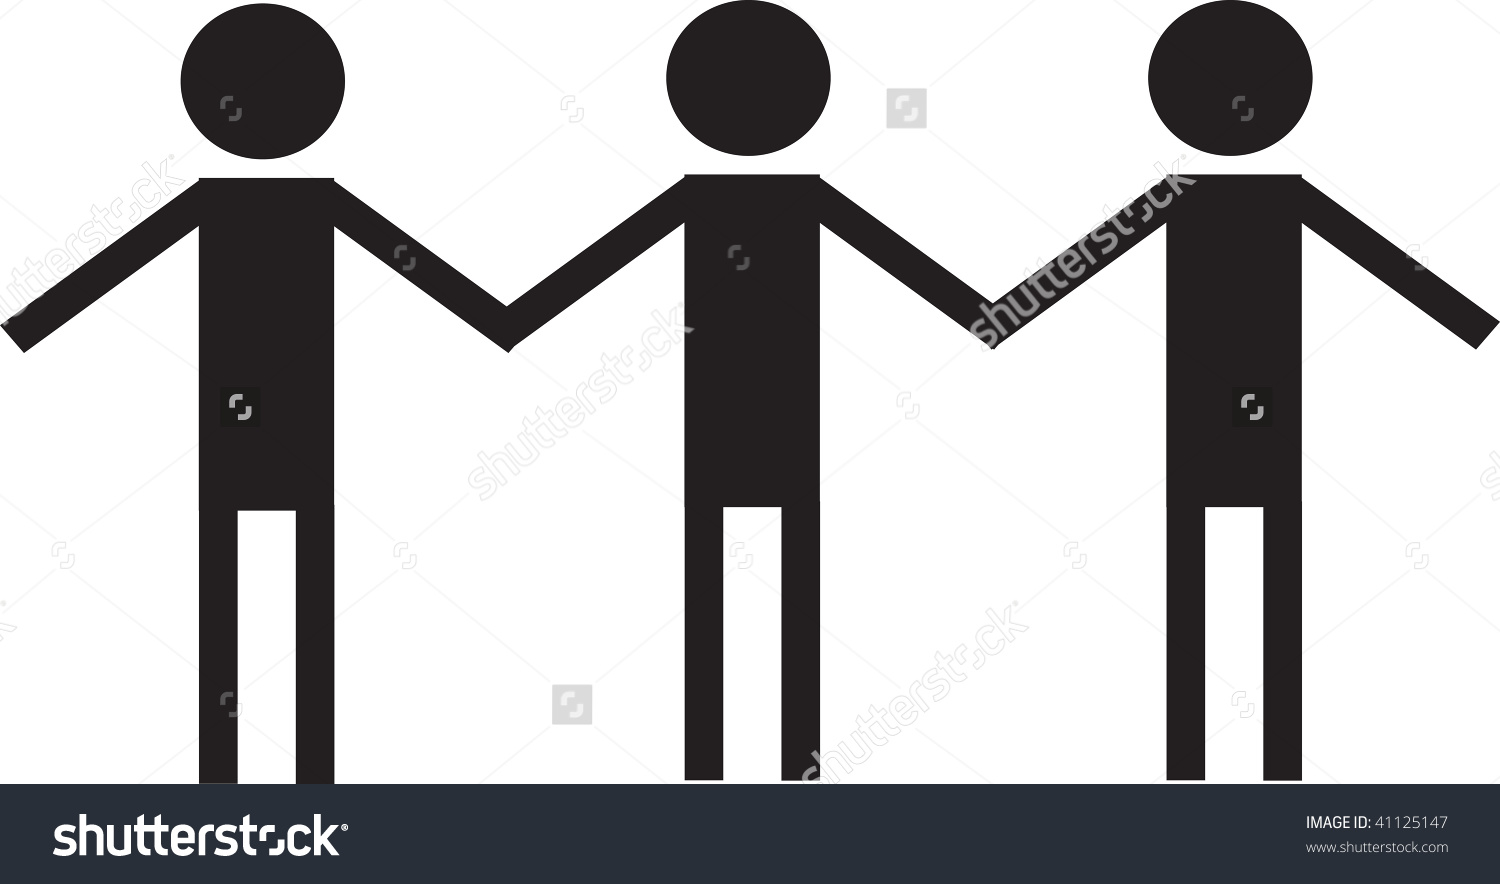 Clip art illustration of thre - People Holding Hands Clipart